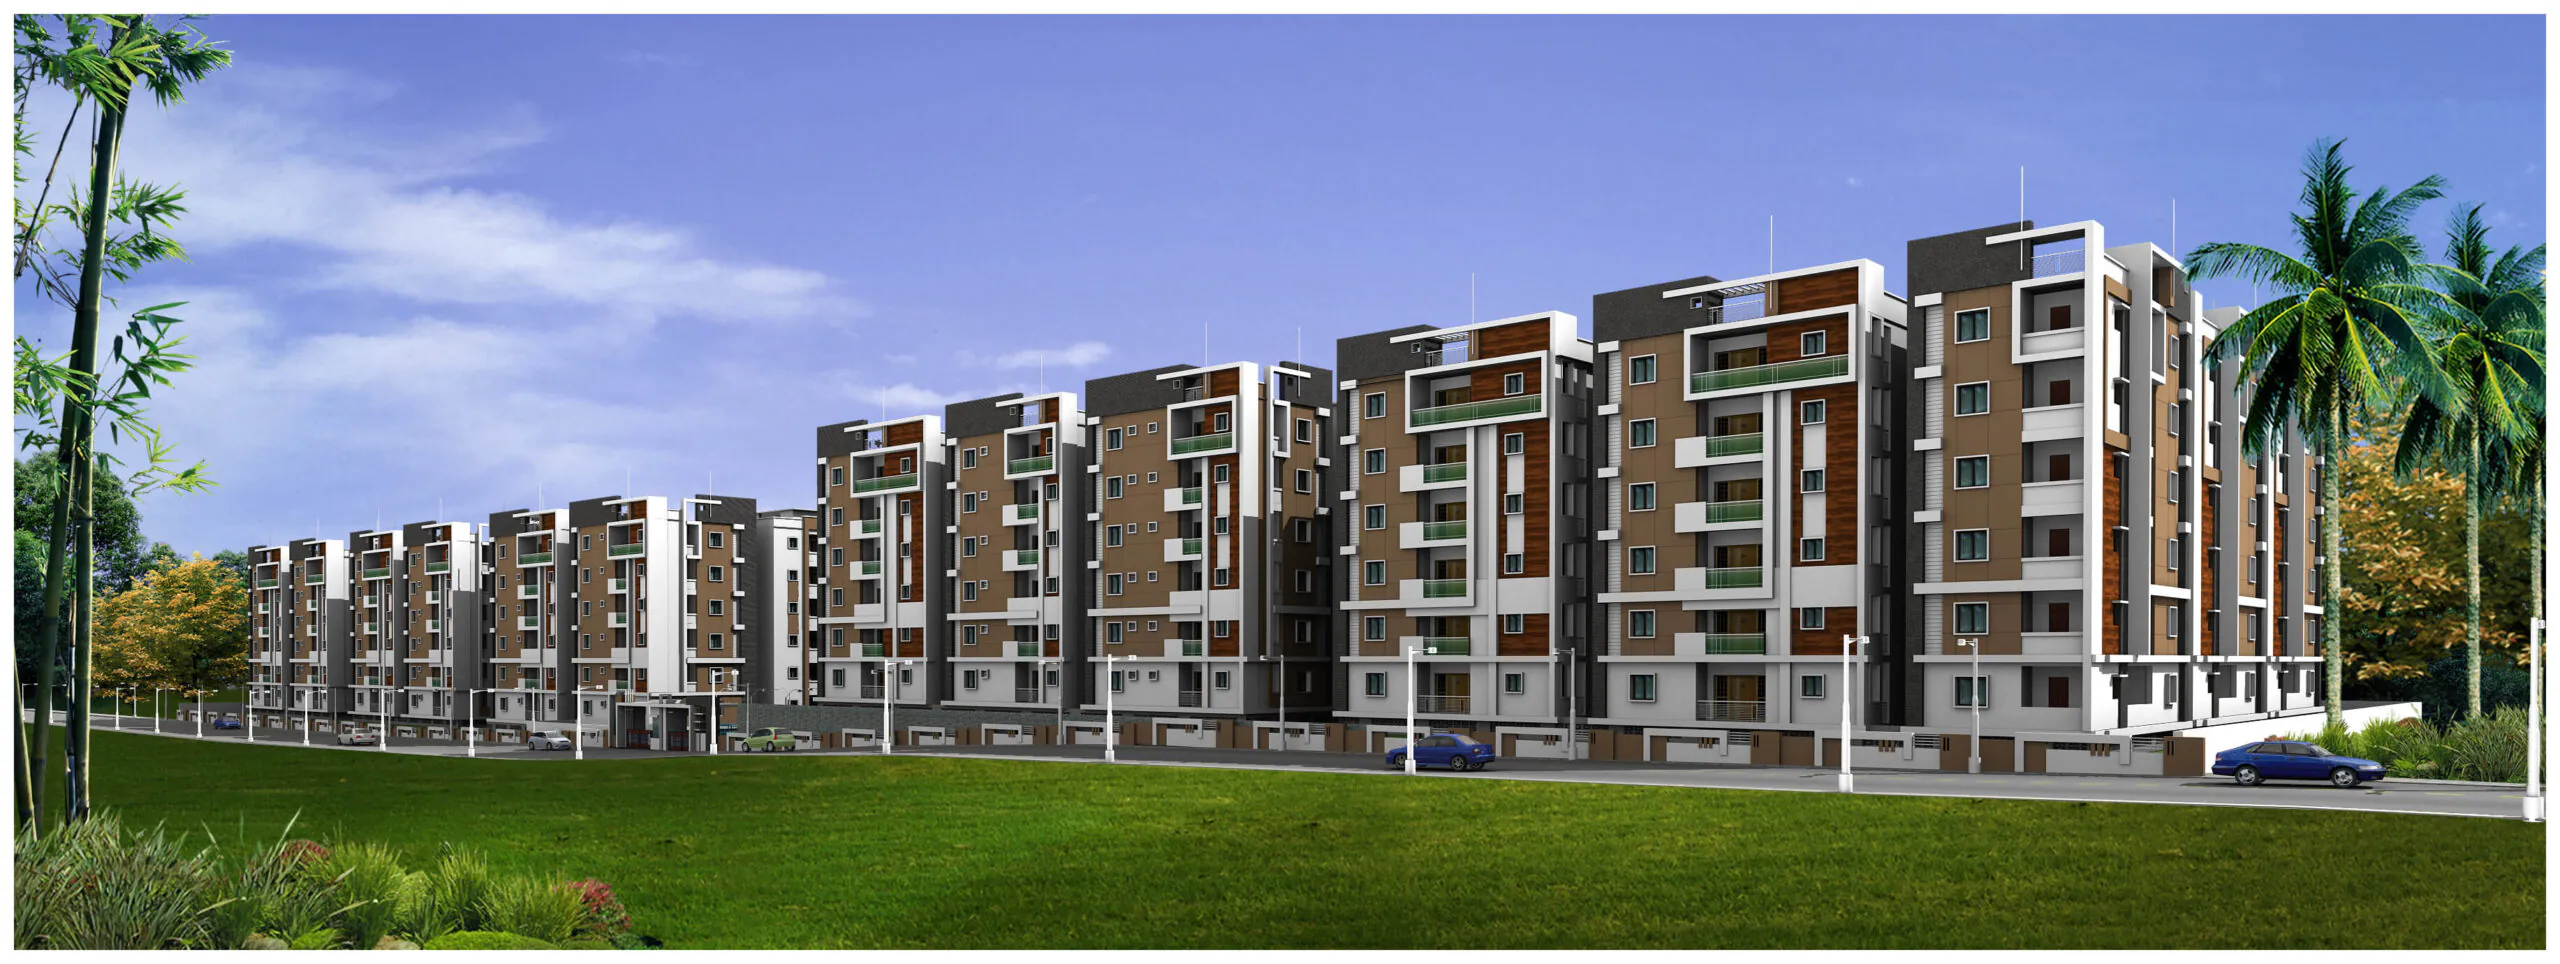 2 and 3 bhk Residential Flats Hyderabad |Luxor Apartment Hyderabad: Namishree